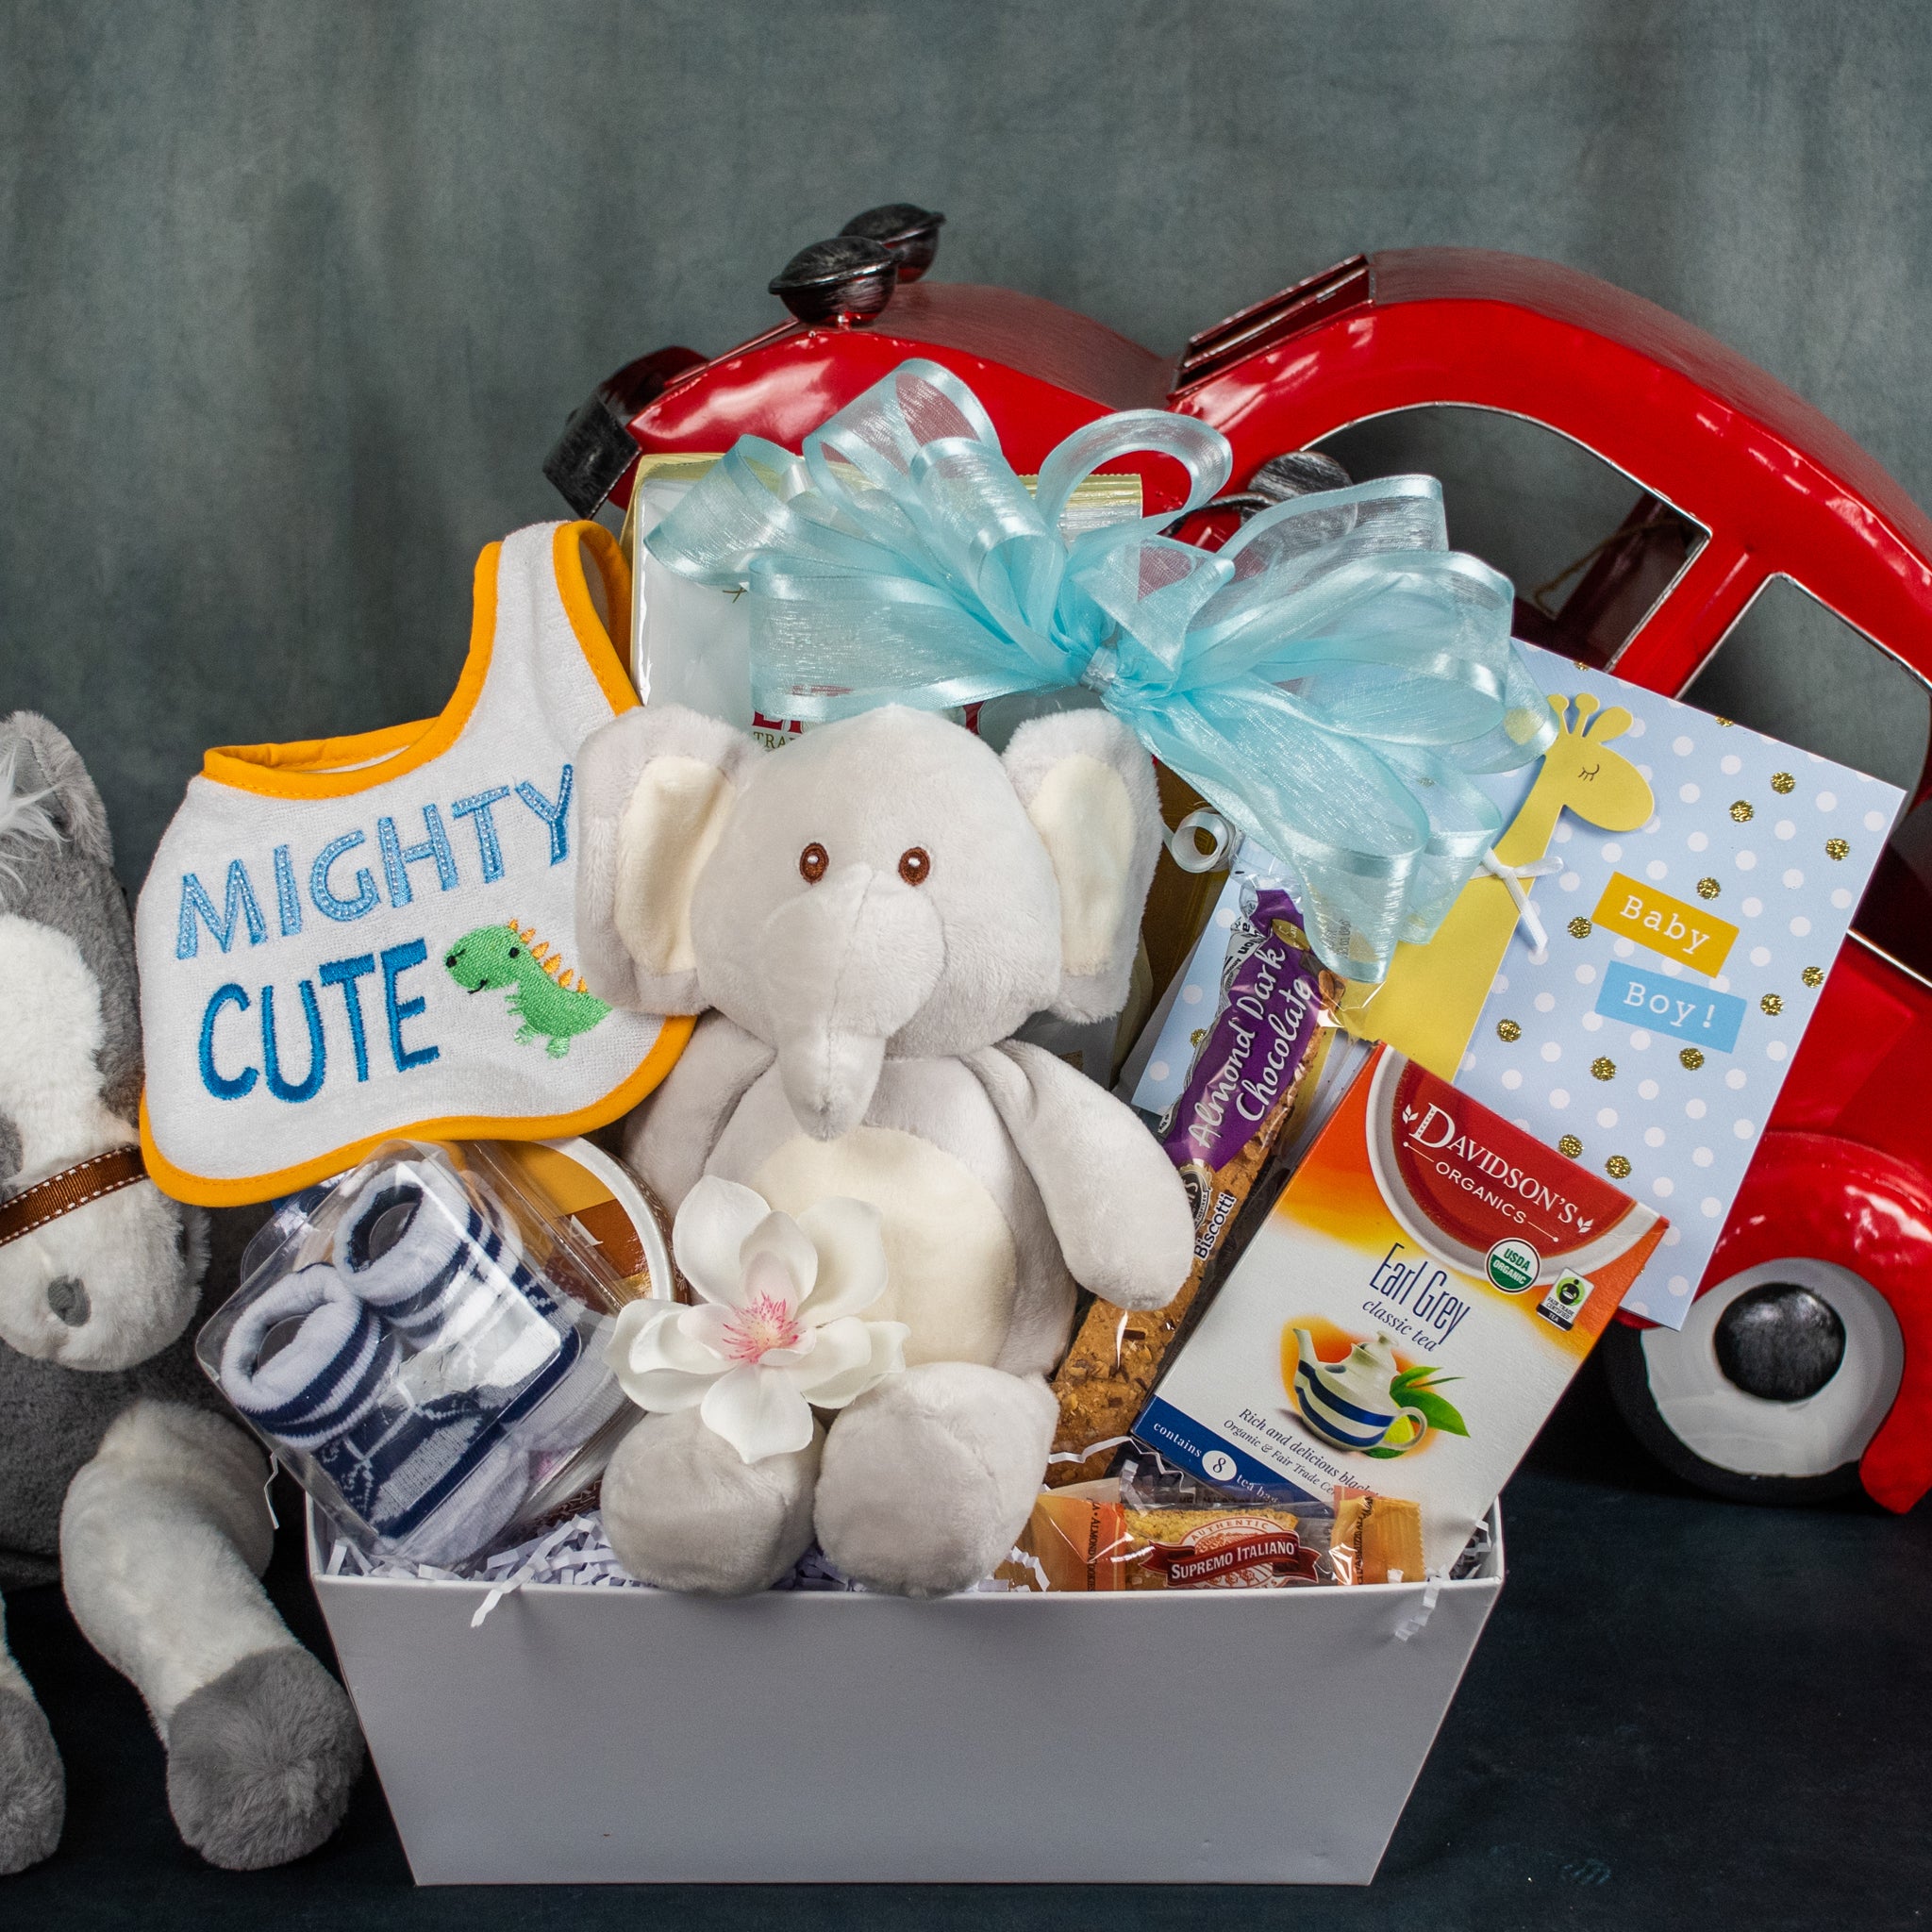 New Arrival Gifts in UAE, New Arrival Gift Baskets to UAE - FNP